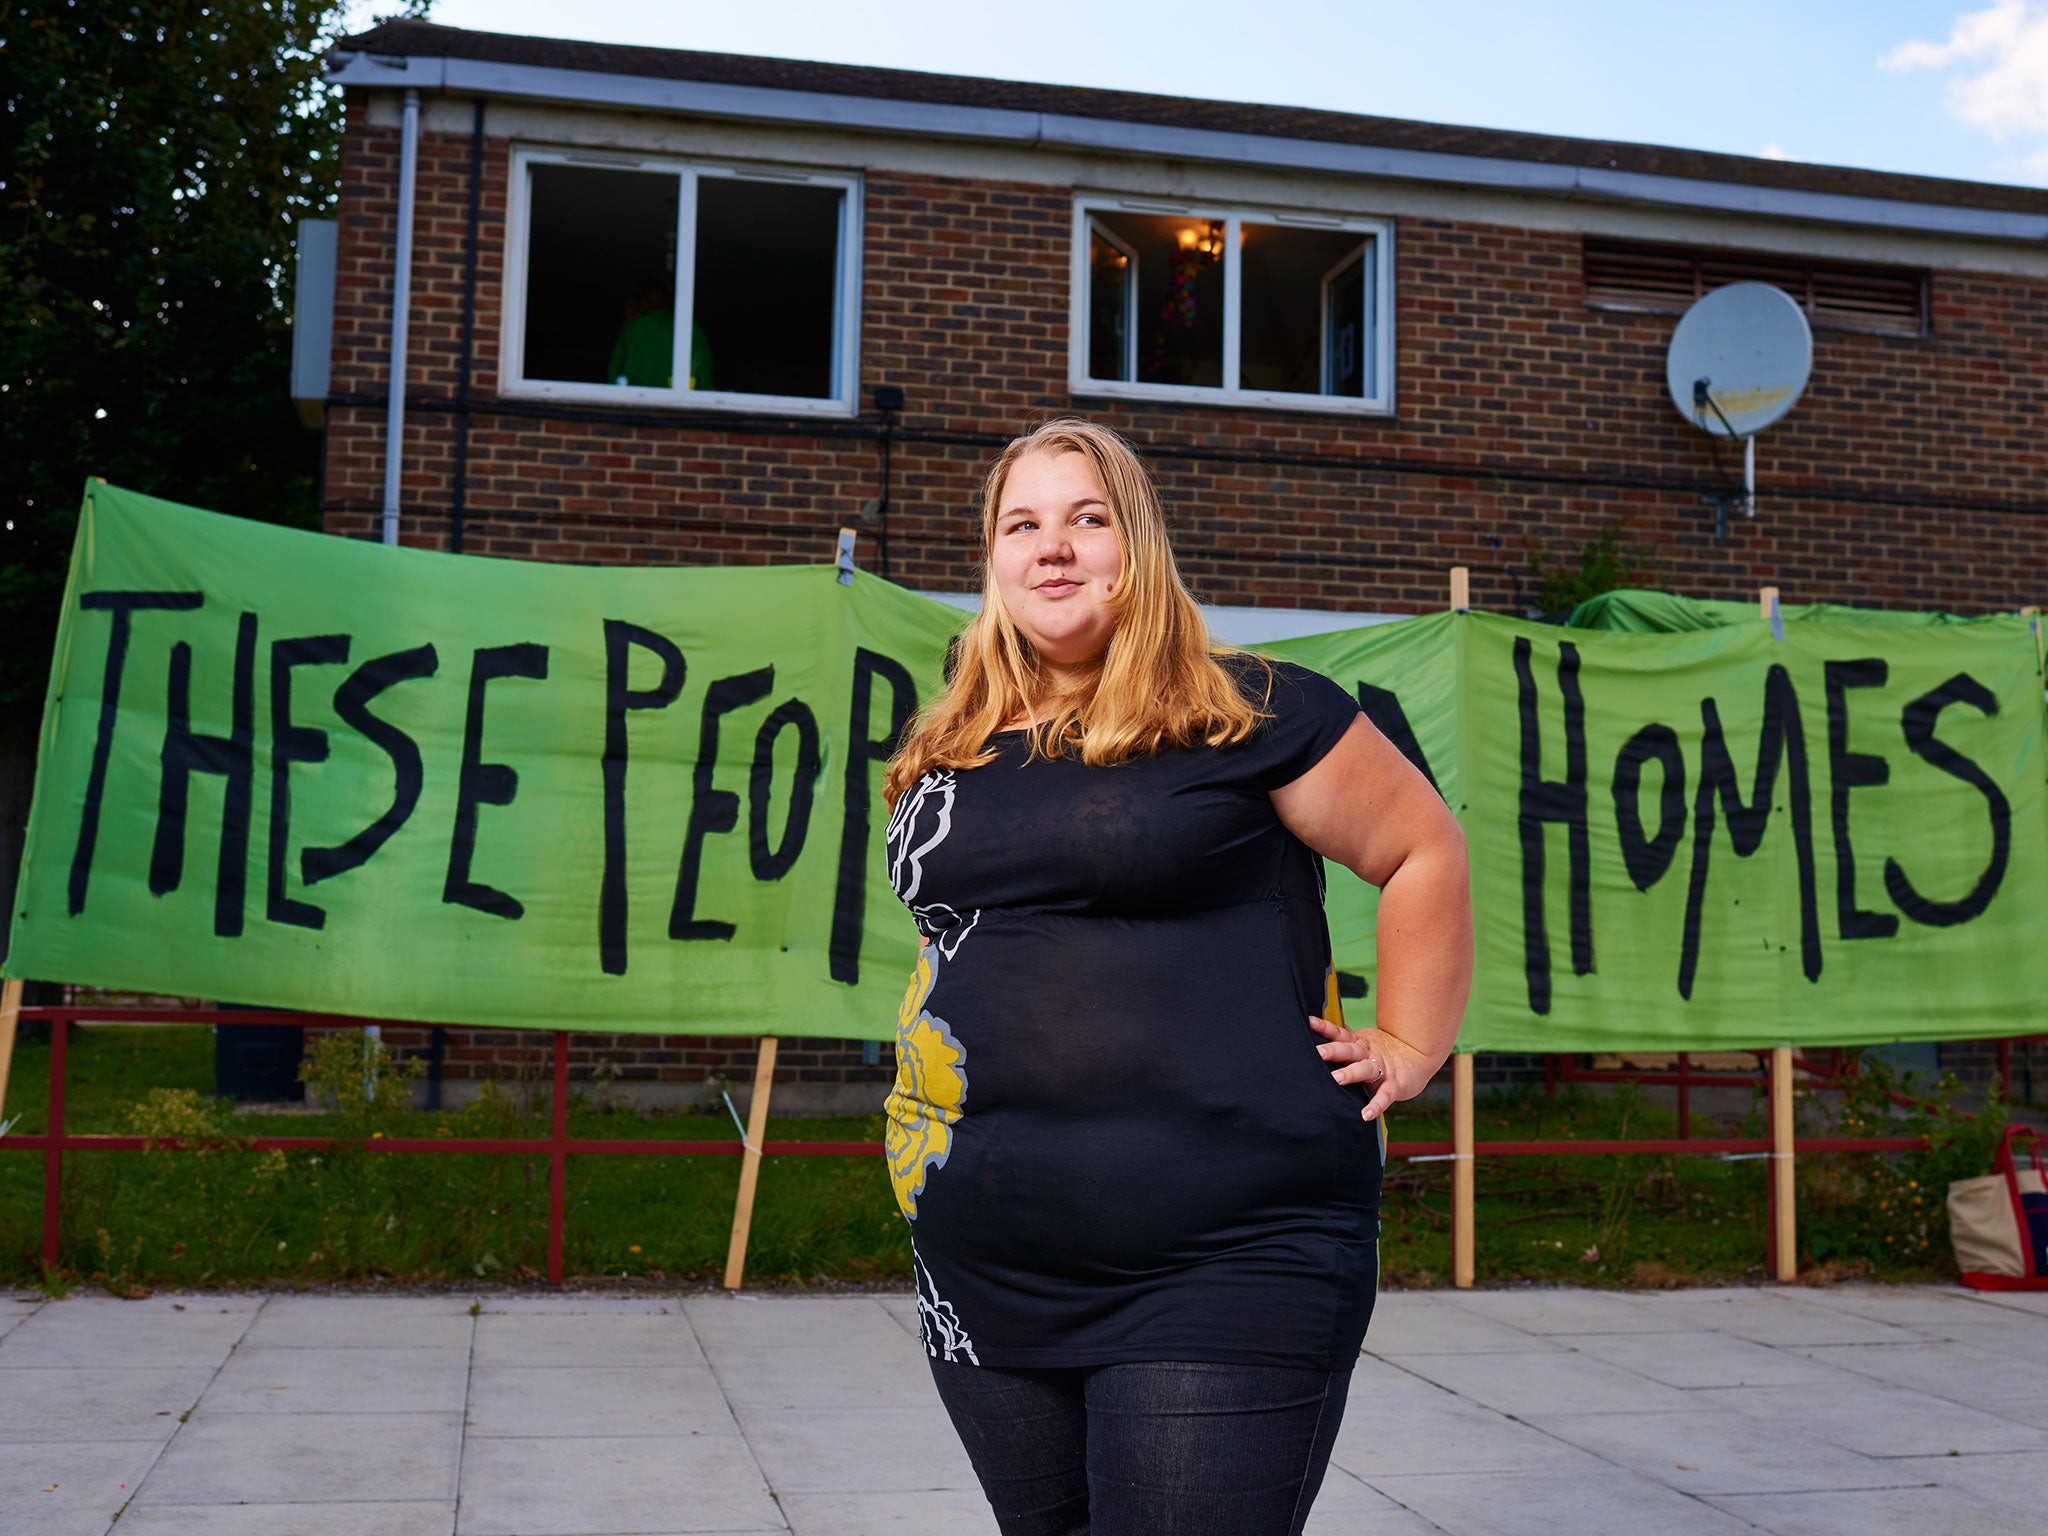 Jasmine Stone is one of a group of mothers evicted from a hostel who are now resisting the local authority by taking up residence on an empty estate. The banner reads: ‘These People Need Homes’